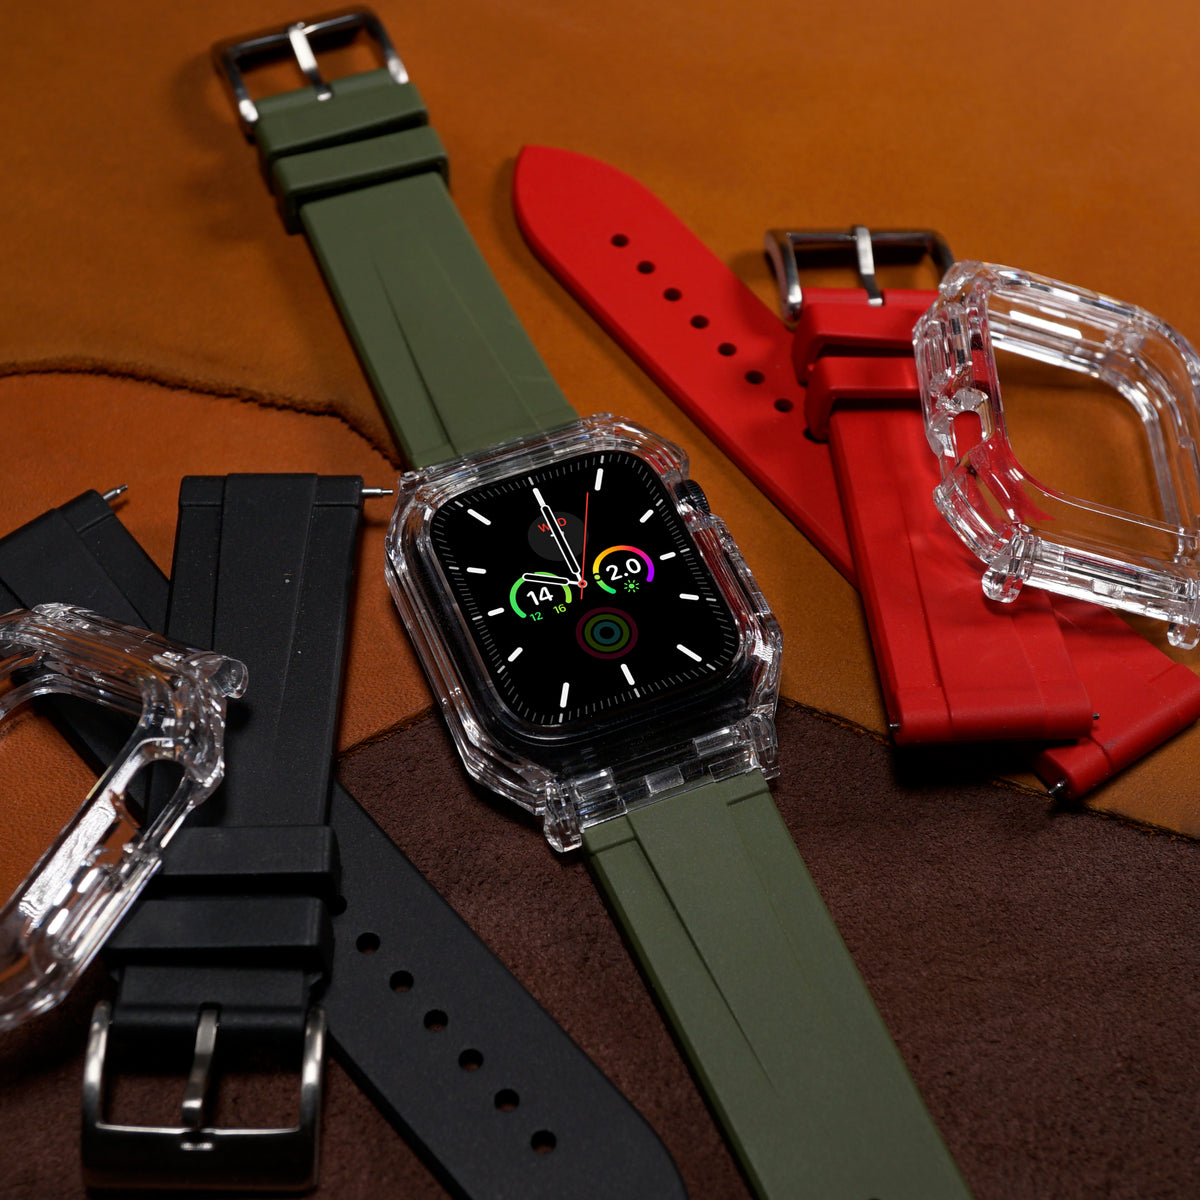 Apple Watch Rubber Mod Kit in Olive - Nomad Watch Works SG